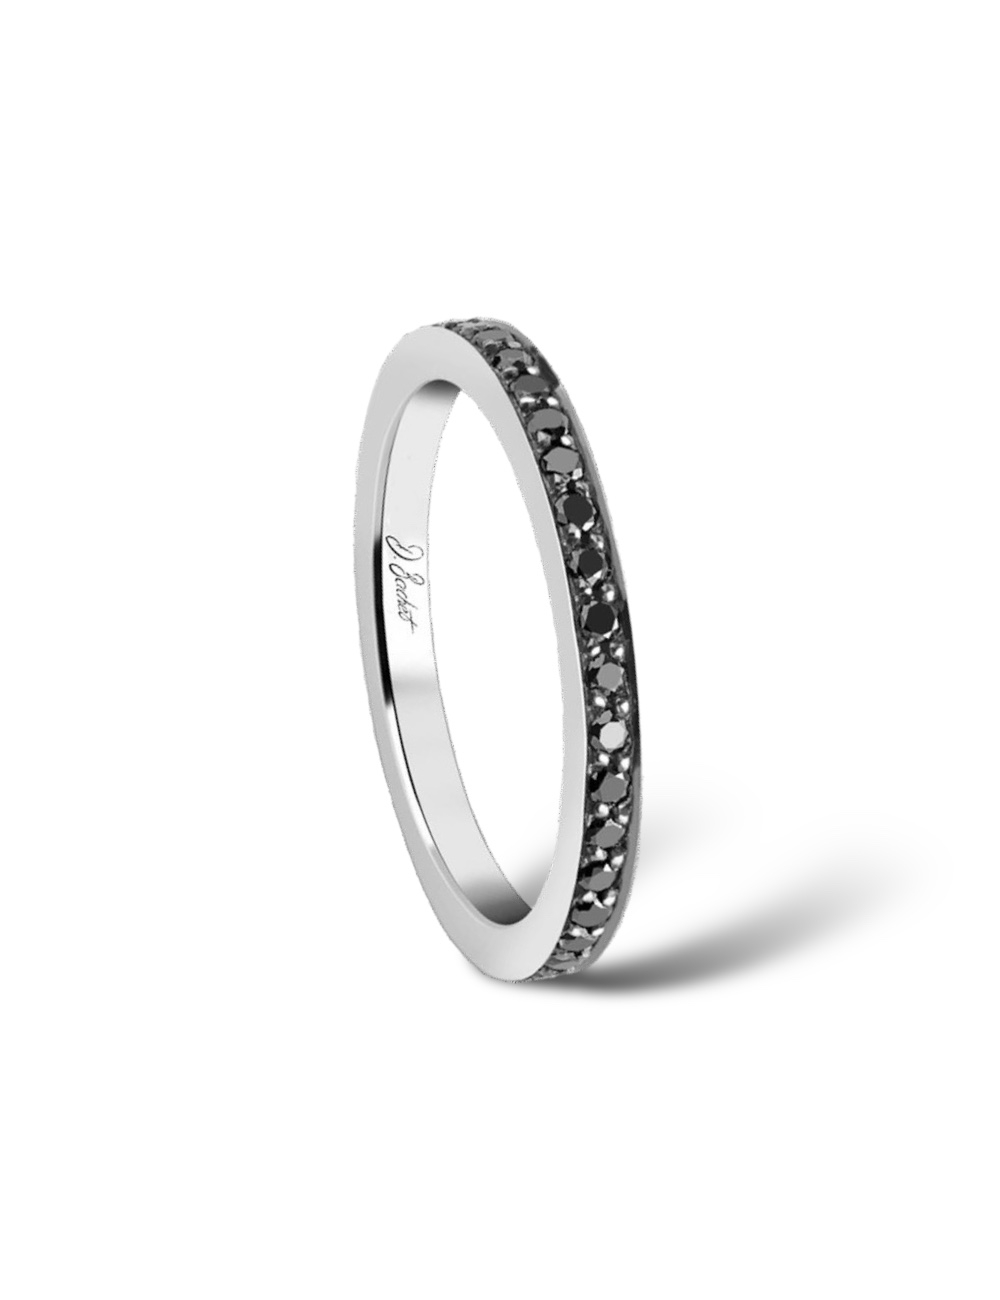 Platinum wedding band for women, adorned with sparkling black diamonds all around the ring, elegantly reflecting light.